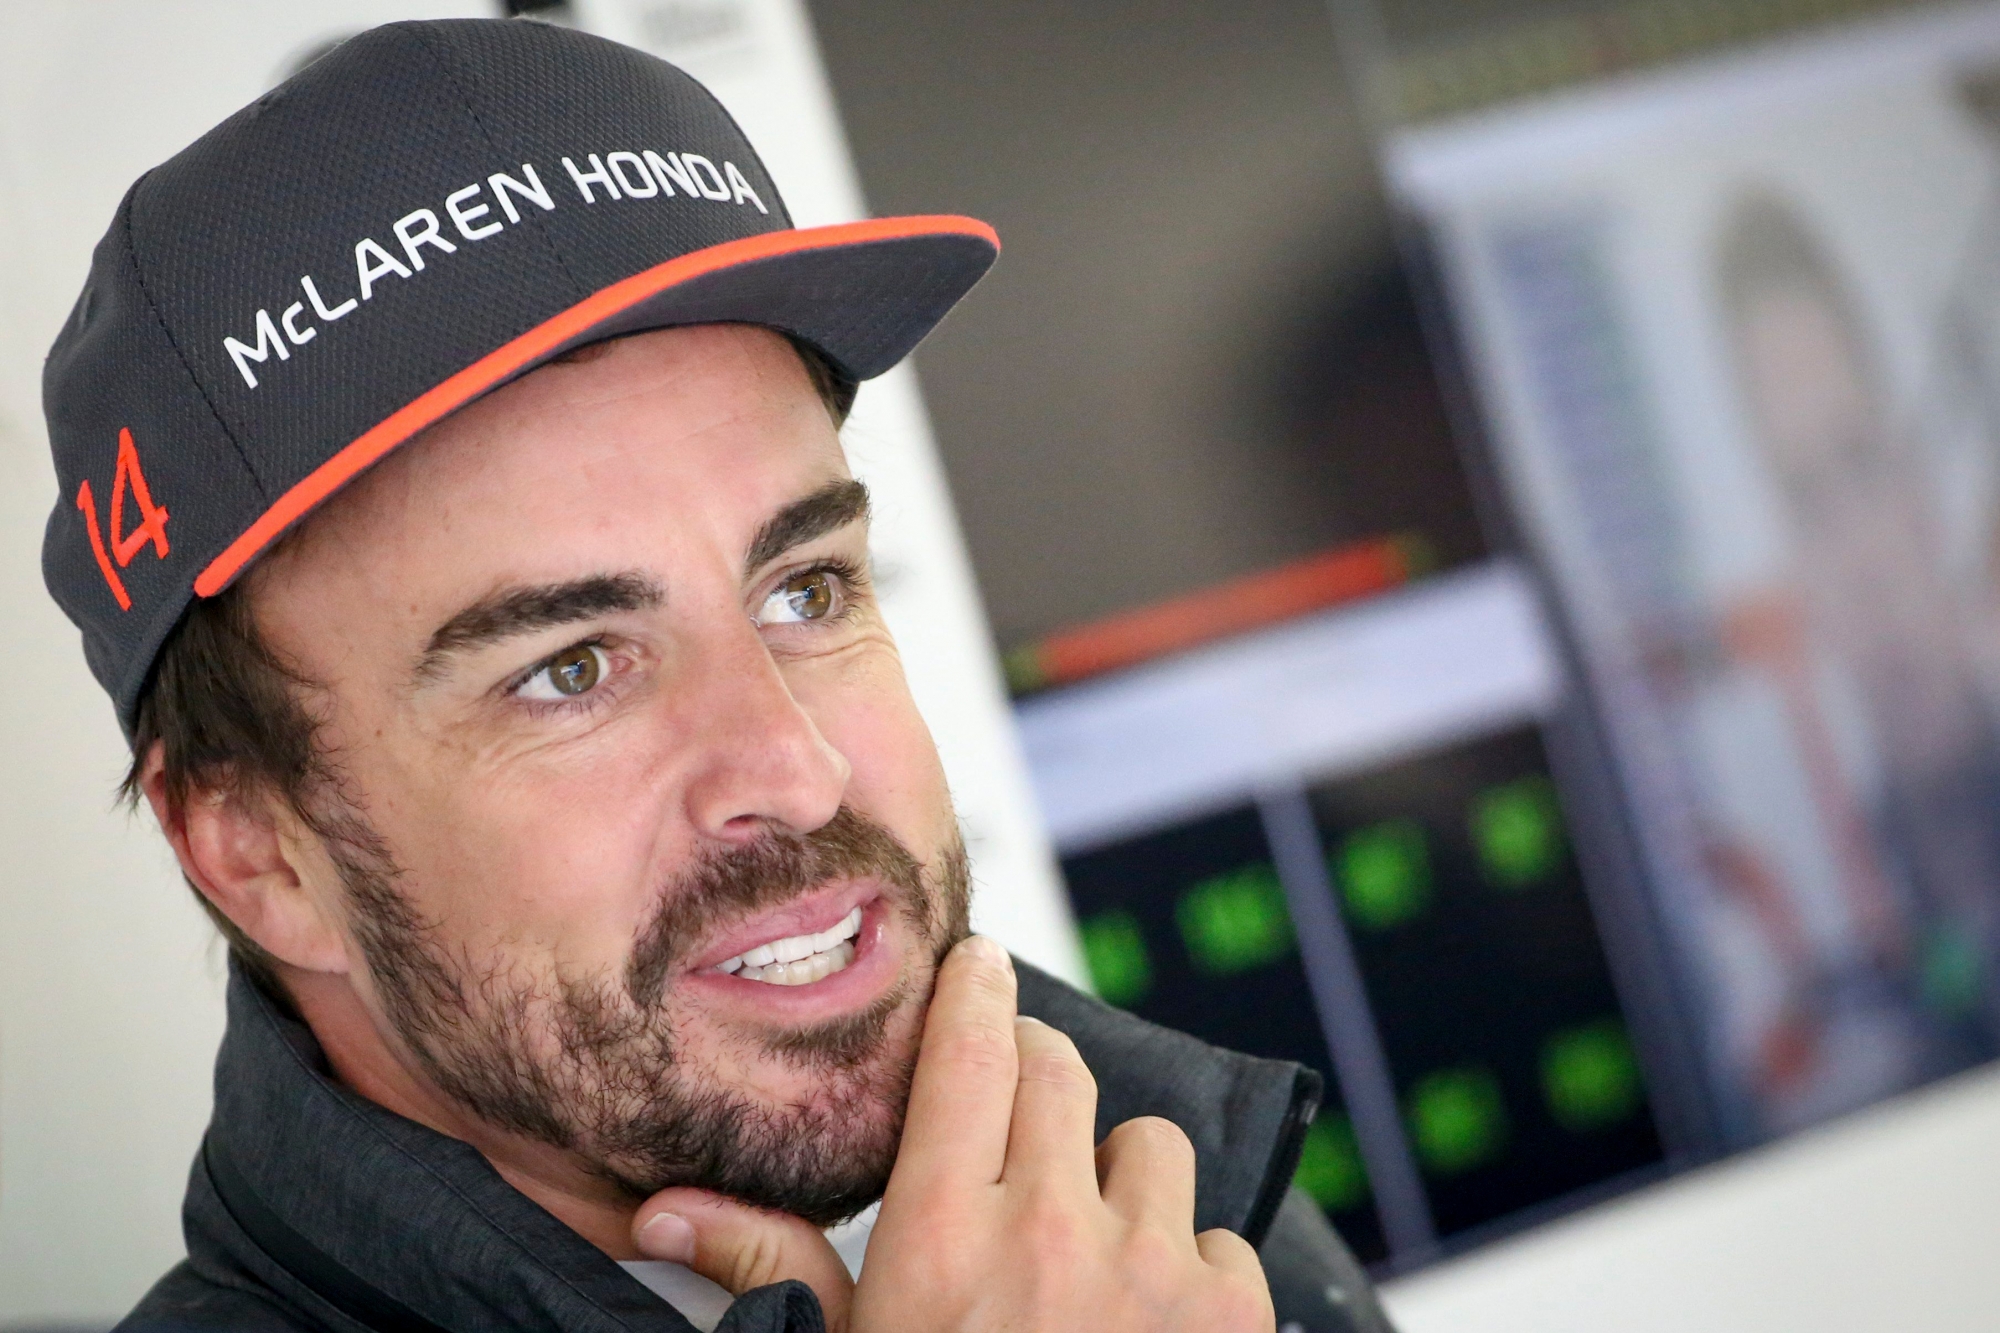 epa05894052 Spanish Formula One driver Fernando Alonso of McLaren-Honda inside the team garage during the first practice session ahead of the Chinese Formula One Grand Prix at the Shanghai International circuit in Shanghai, China, 07 April 2017. The 2017 Chinese Formula One Grand Prix will take place on 09 April.  EPA/DIEGO AZUBEL CHINA FORMULA ONE GRAND PRIX